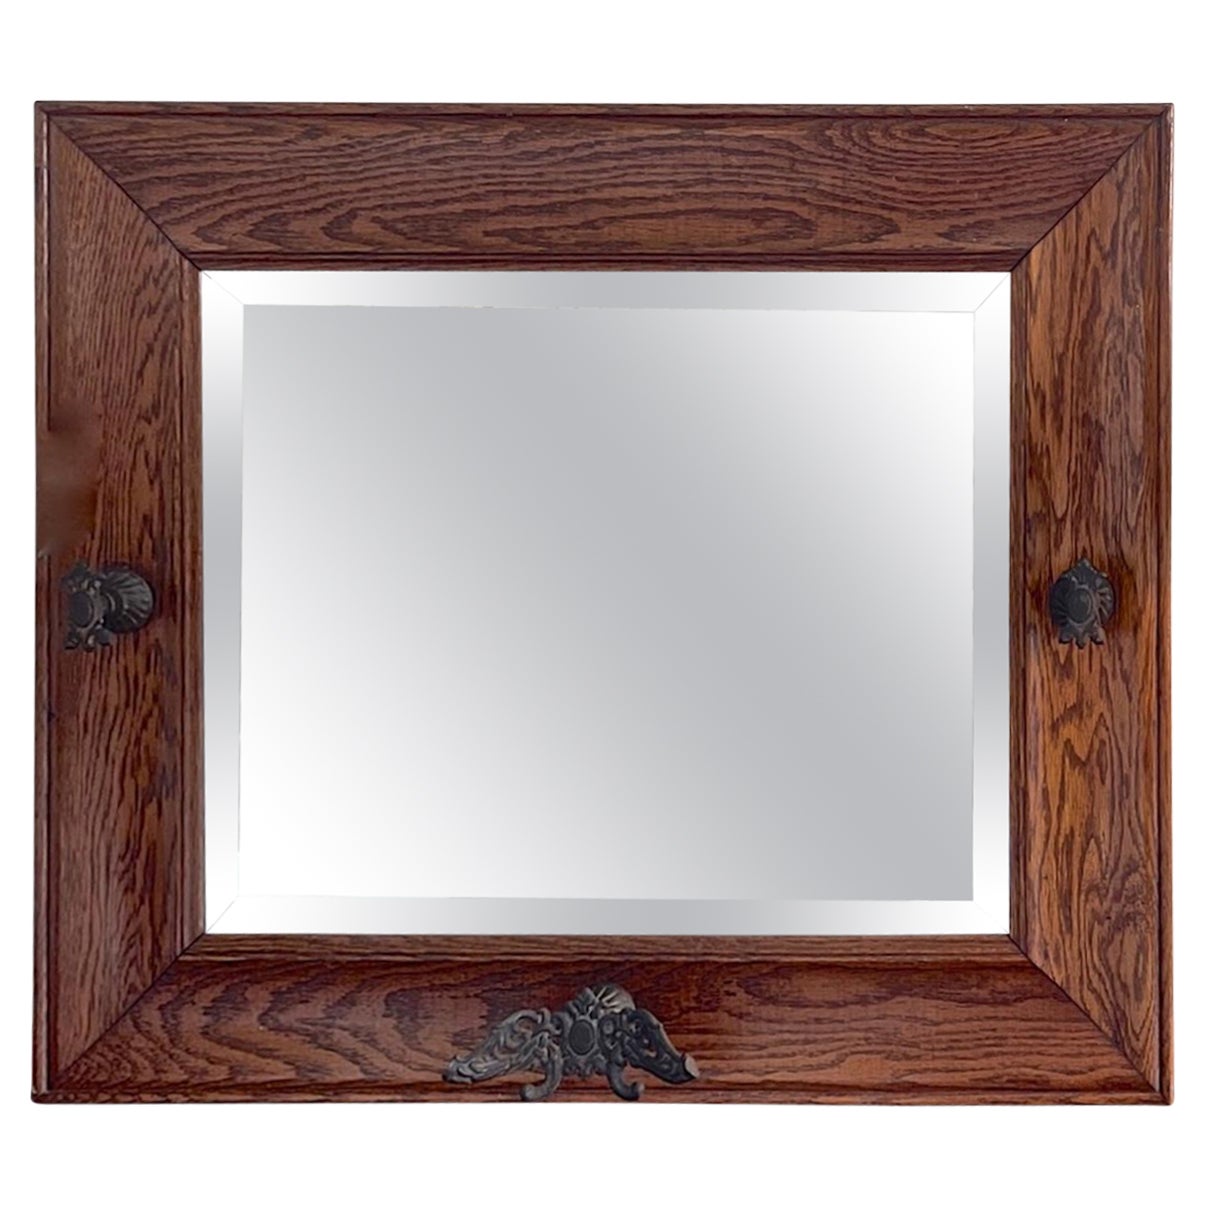 English 19th Century Stained Oak Framed Mirror with Beveled Glass For Sale